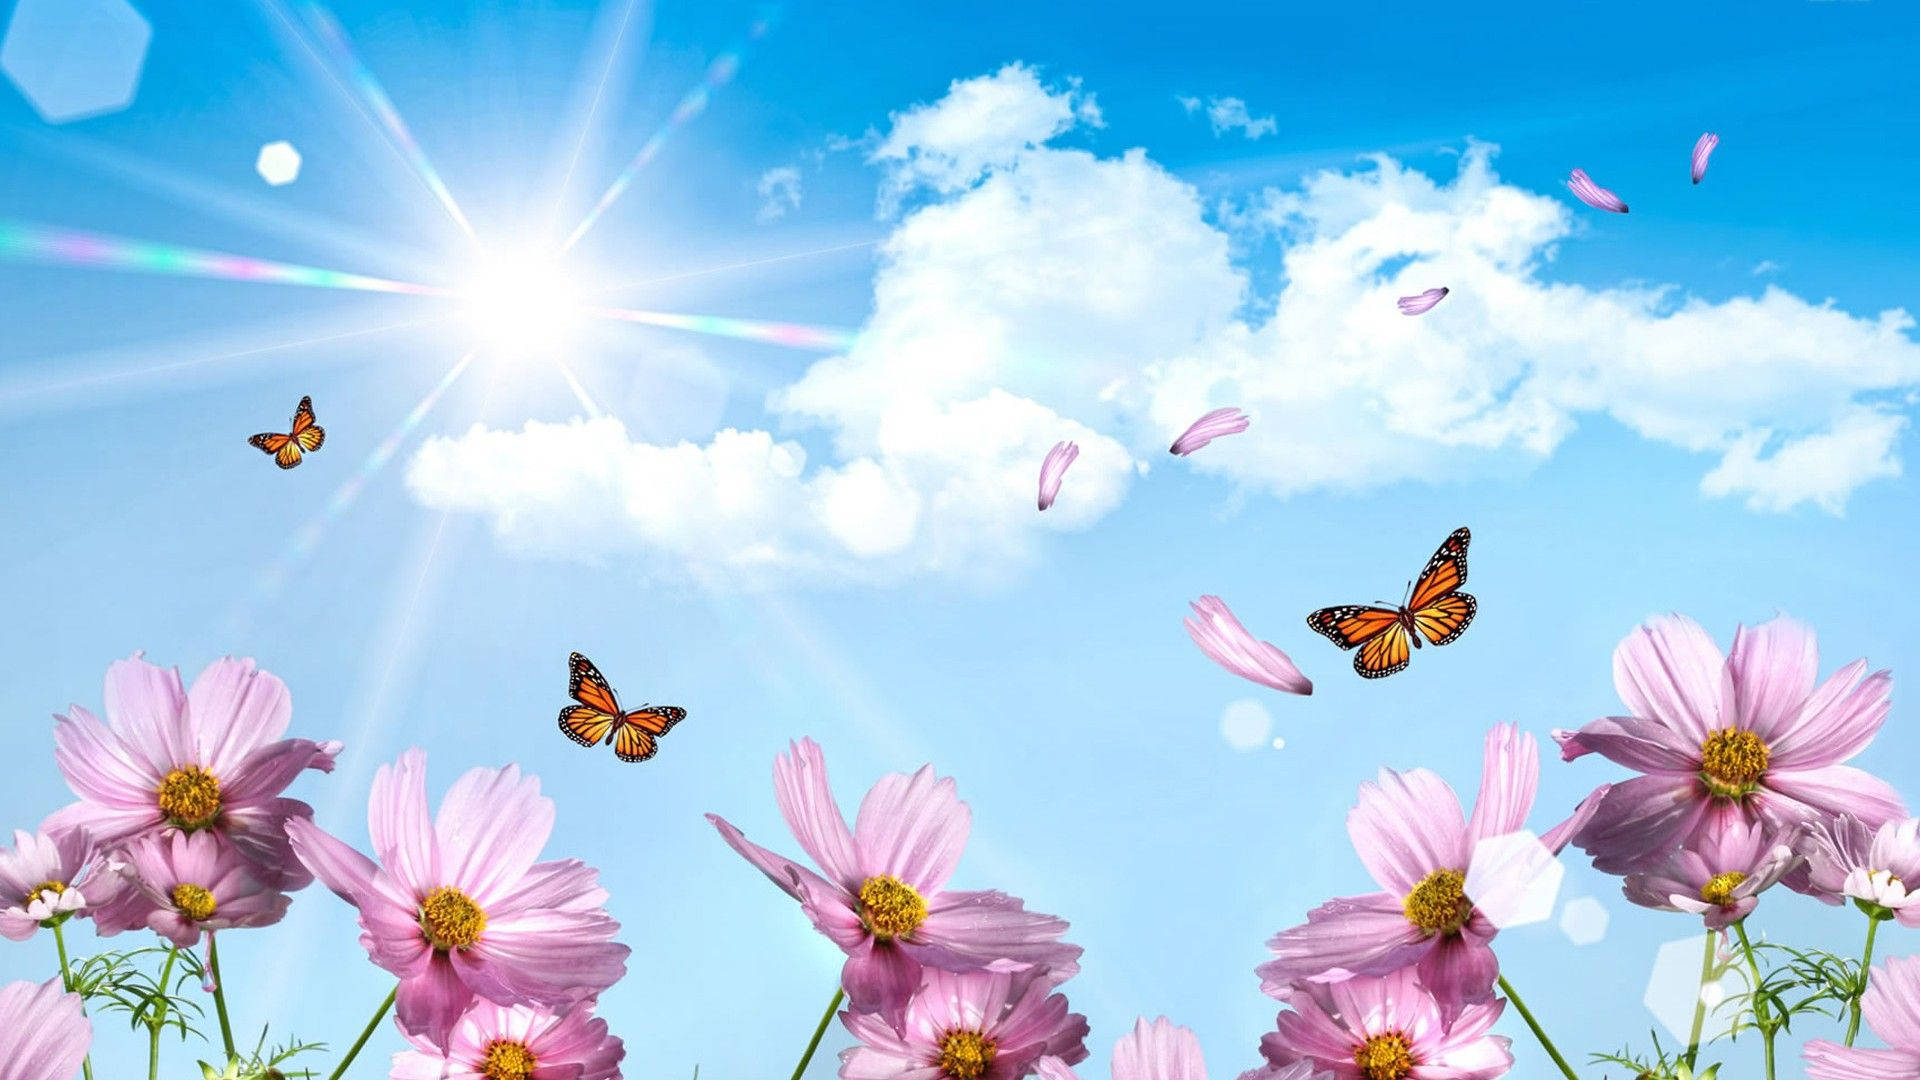 Pink Pansy And Butterflies Wallpaper